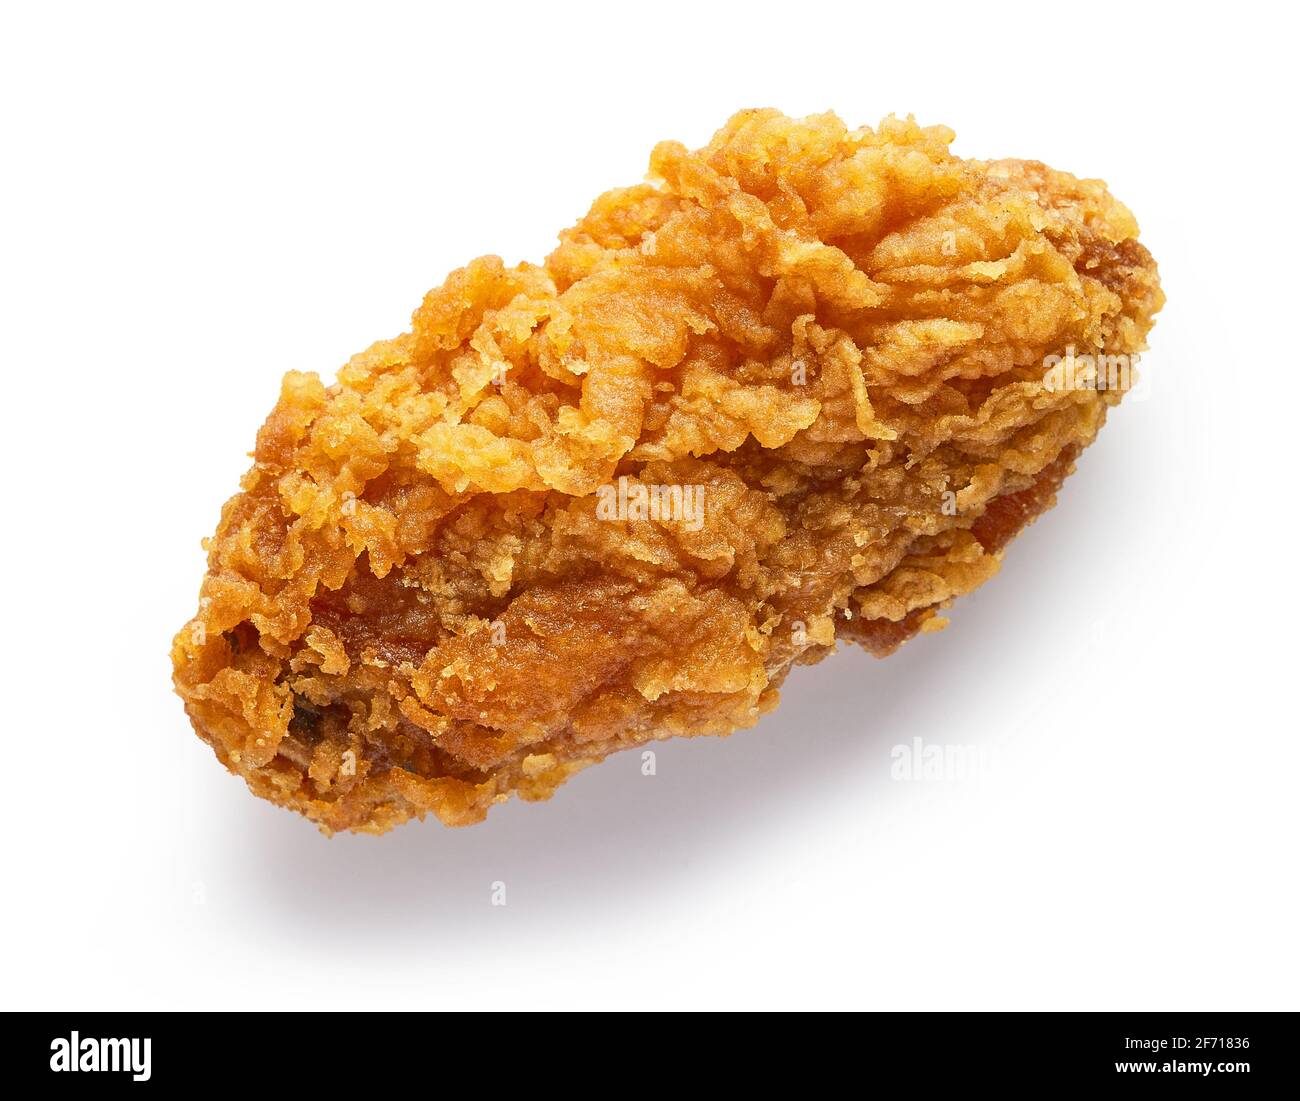 fried breaded chicken wing isolated on white background, top view Stock Photo